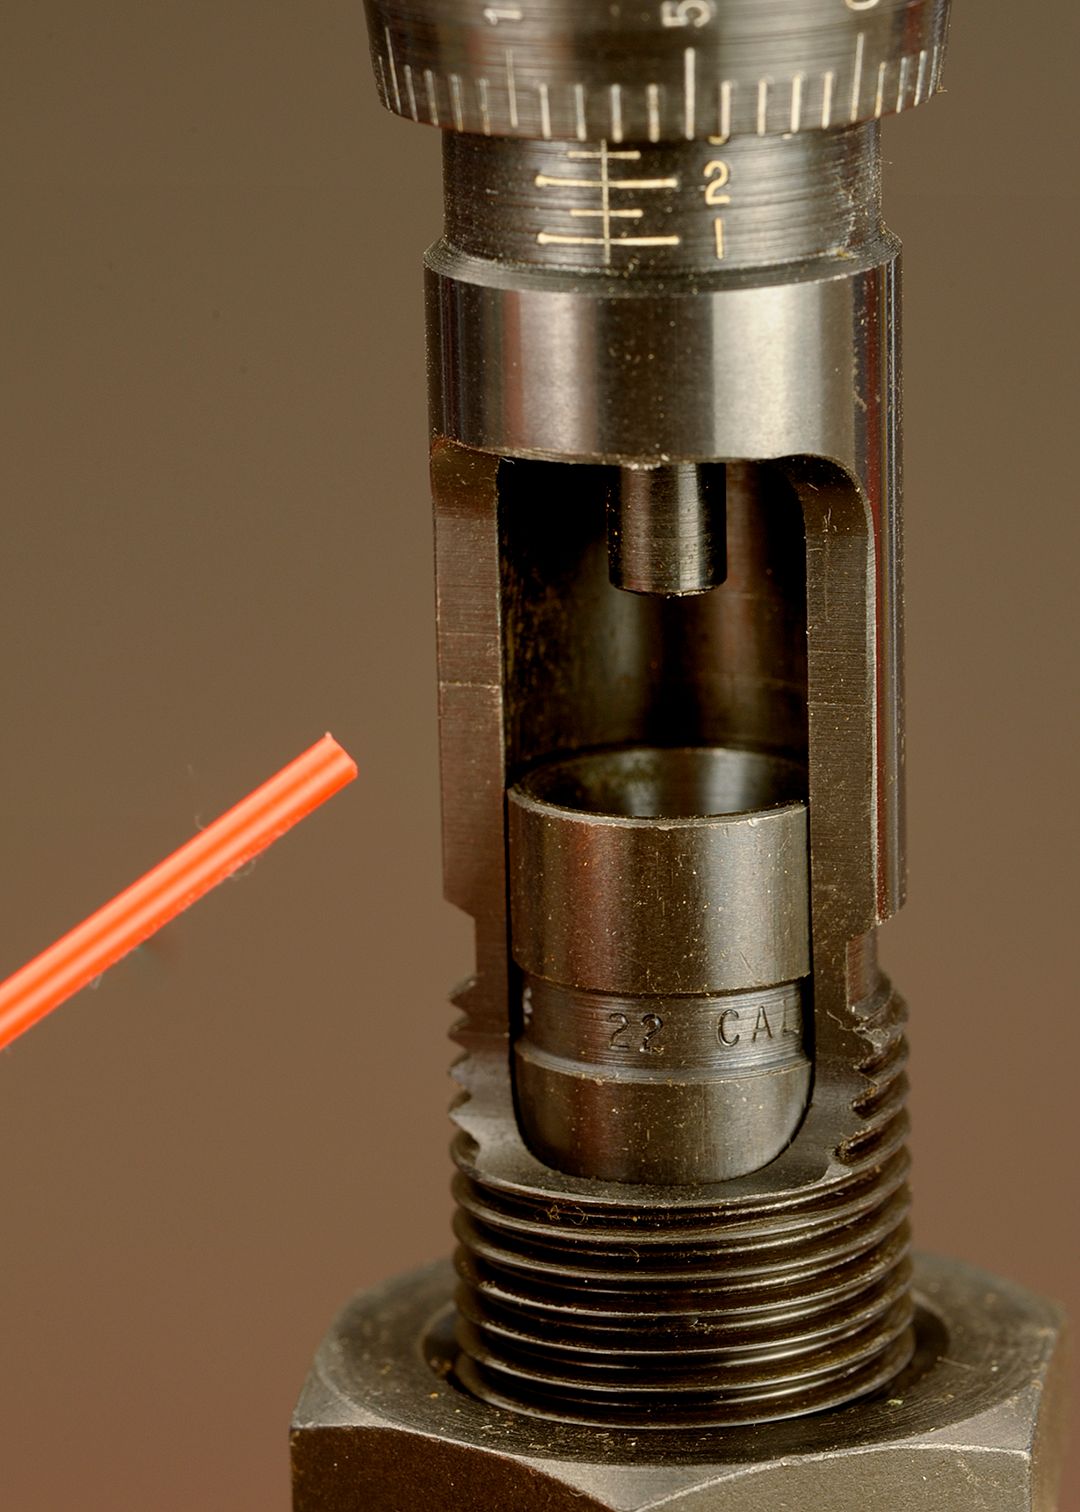 This photo illustrates the movable and free-floating bullet seating system on the die. The bullet sleeve has been moved up for the photo as it usually sits just above the thread line for easy insertion of the bullet.